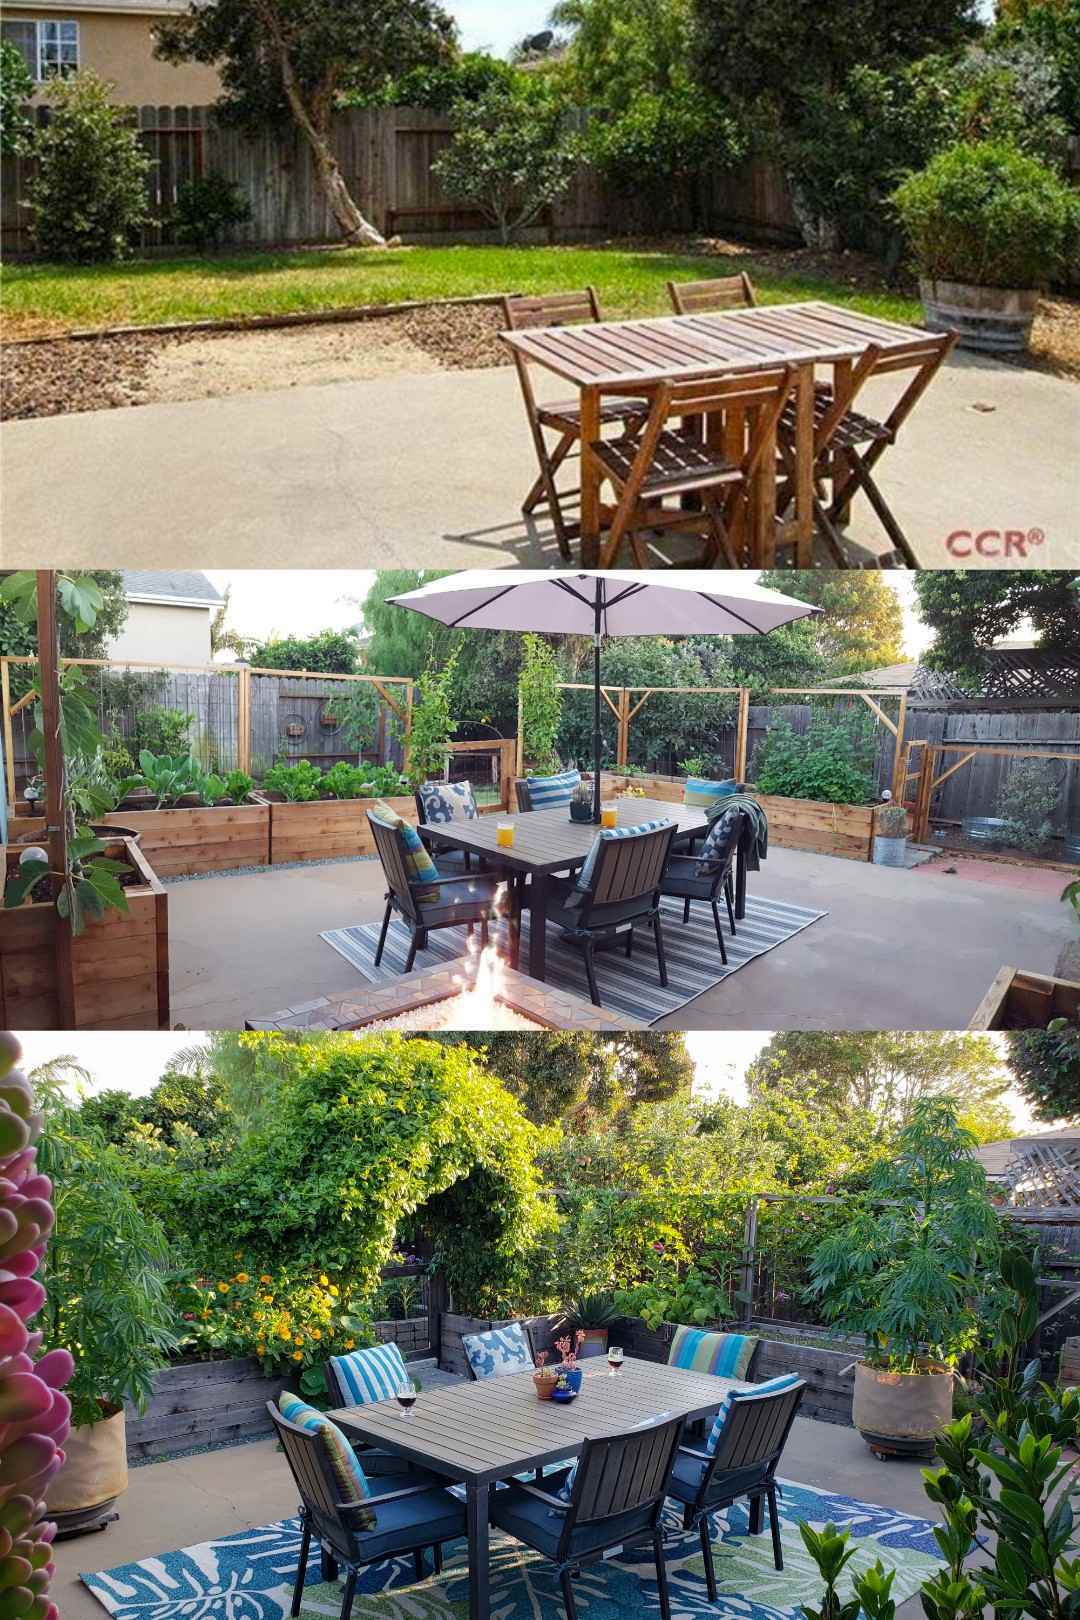 A three part image collage of the backyard patio. The first image shows the patio as it was taken while the house was listed for sale, there is a small patio table with chairs, some grass, and a sand pit of sorts. The second image shows the backyard patio garden after the garden beds and trellises have been installed surrounding the concrete patio. There are plants growing in every bed, a larger patio table on top of an outdoor rug, and a lit gas fireplace in the foreground. The third image shows the backyard patio after many of the plants have grown in, the main one being the passionfruit vine which has covered the metal arch over the gate to the backyard area. There are much more plants than before as the image is mostly green. 